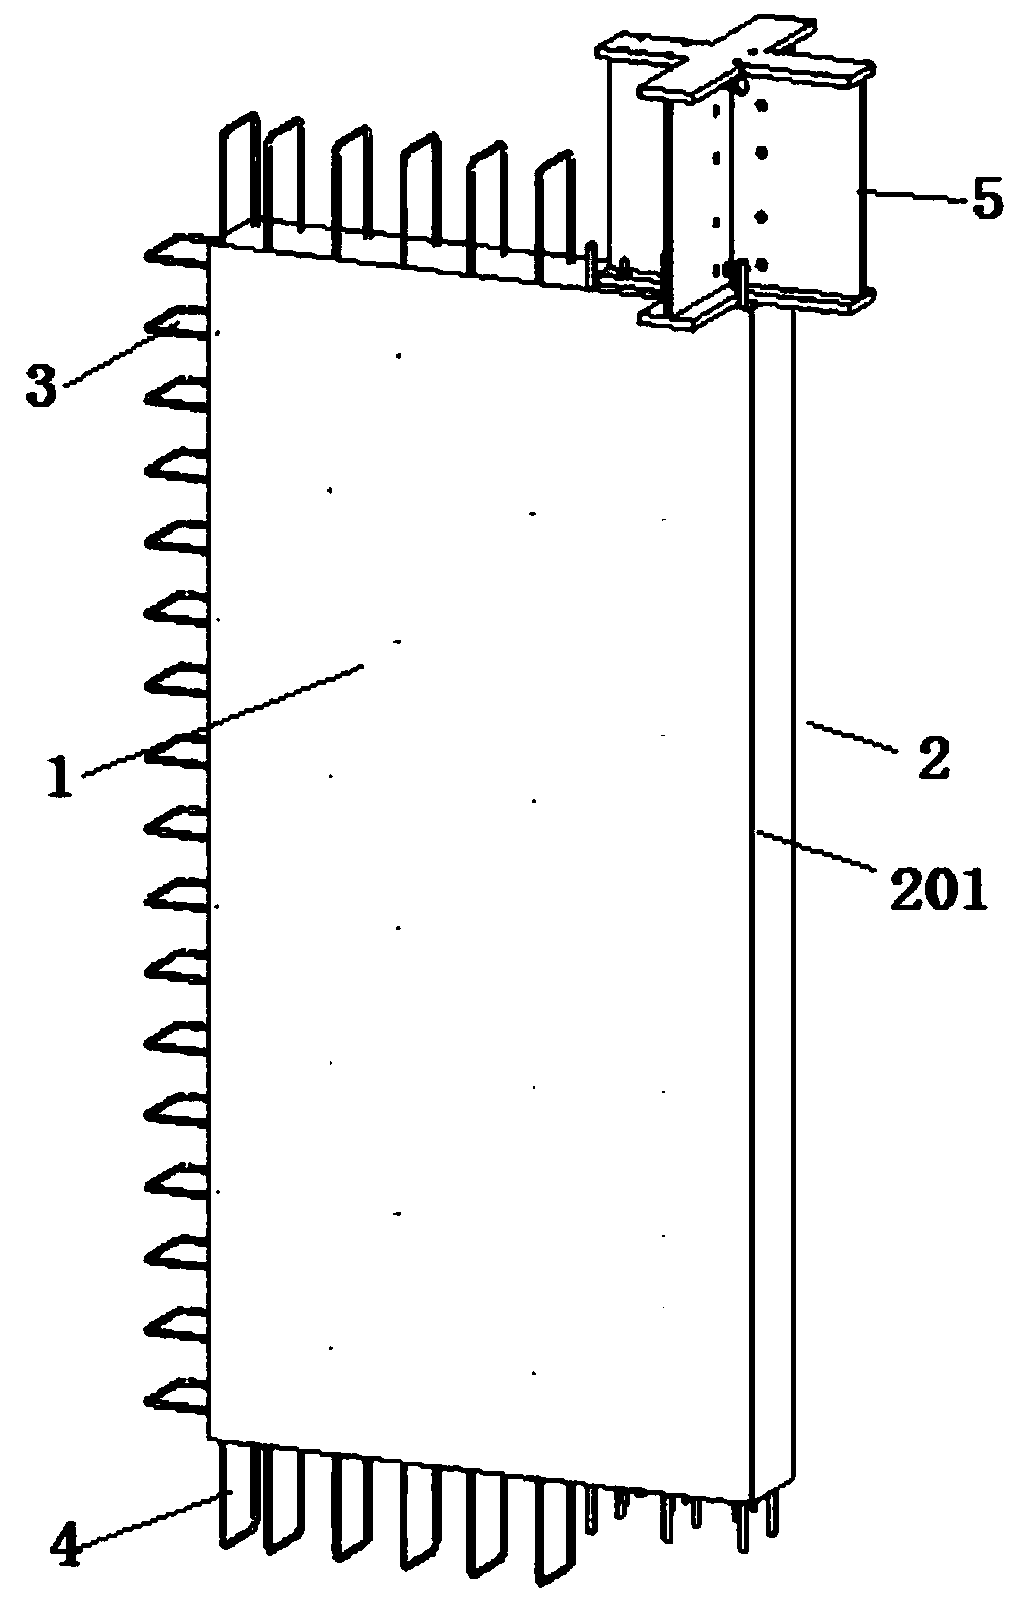 Prefabricated reinforced concrete shear wall convenient to install and construction method